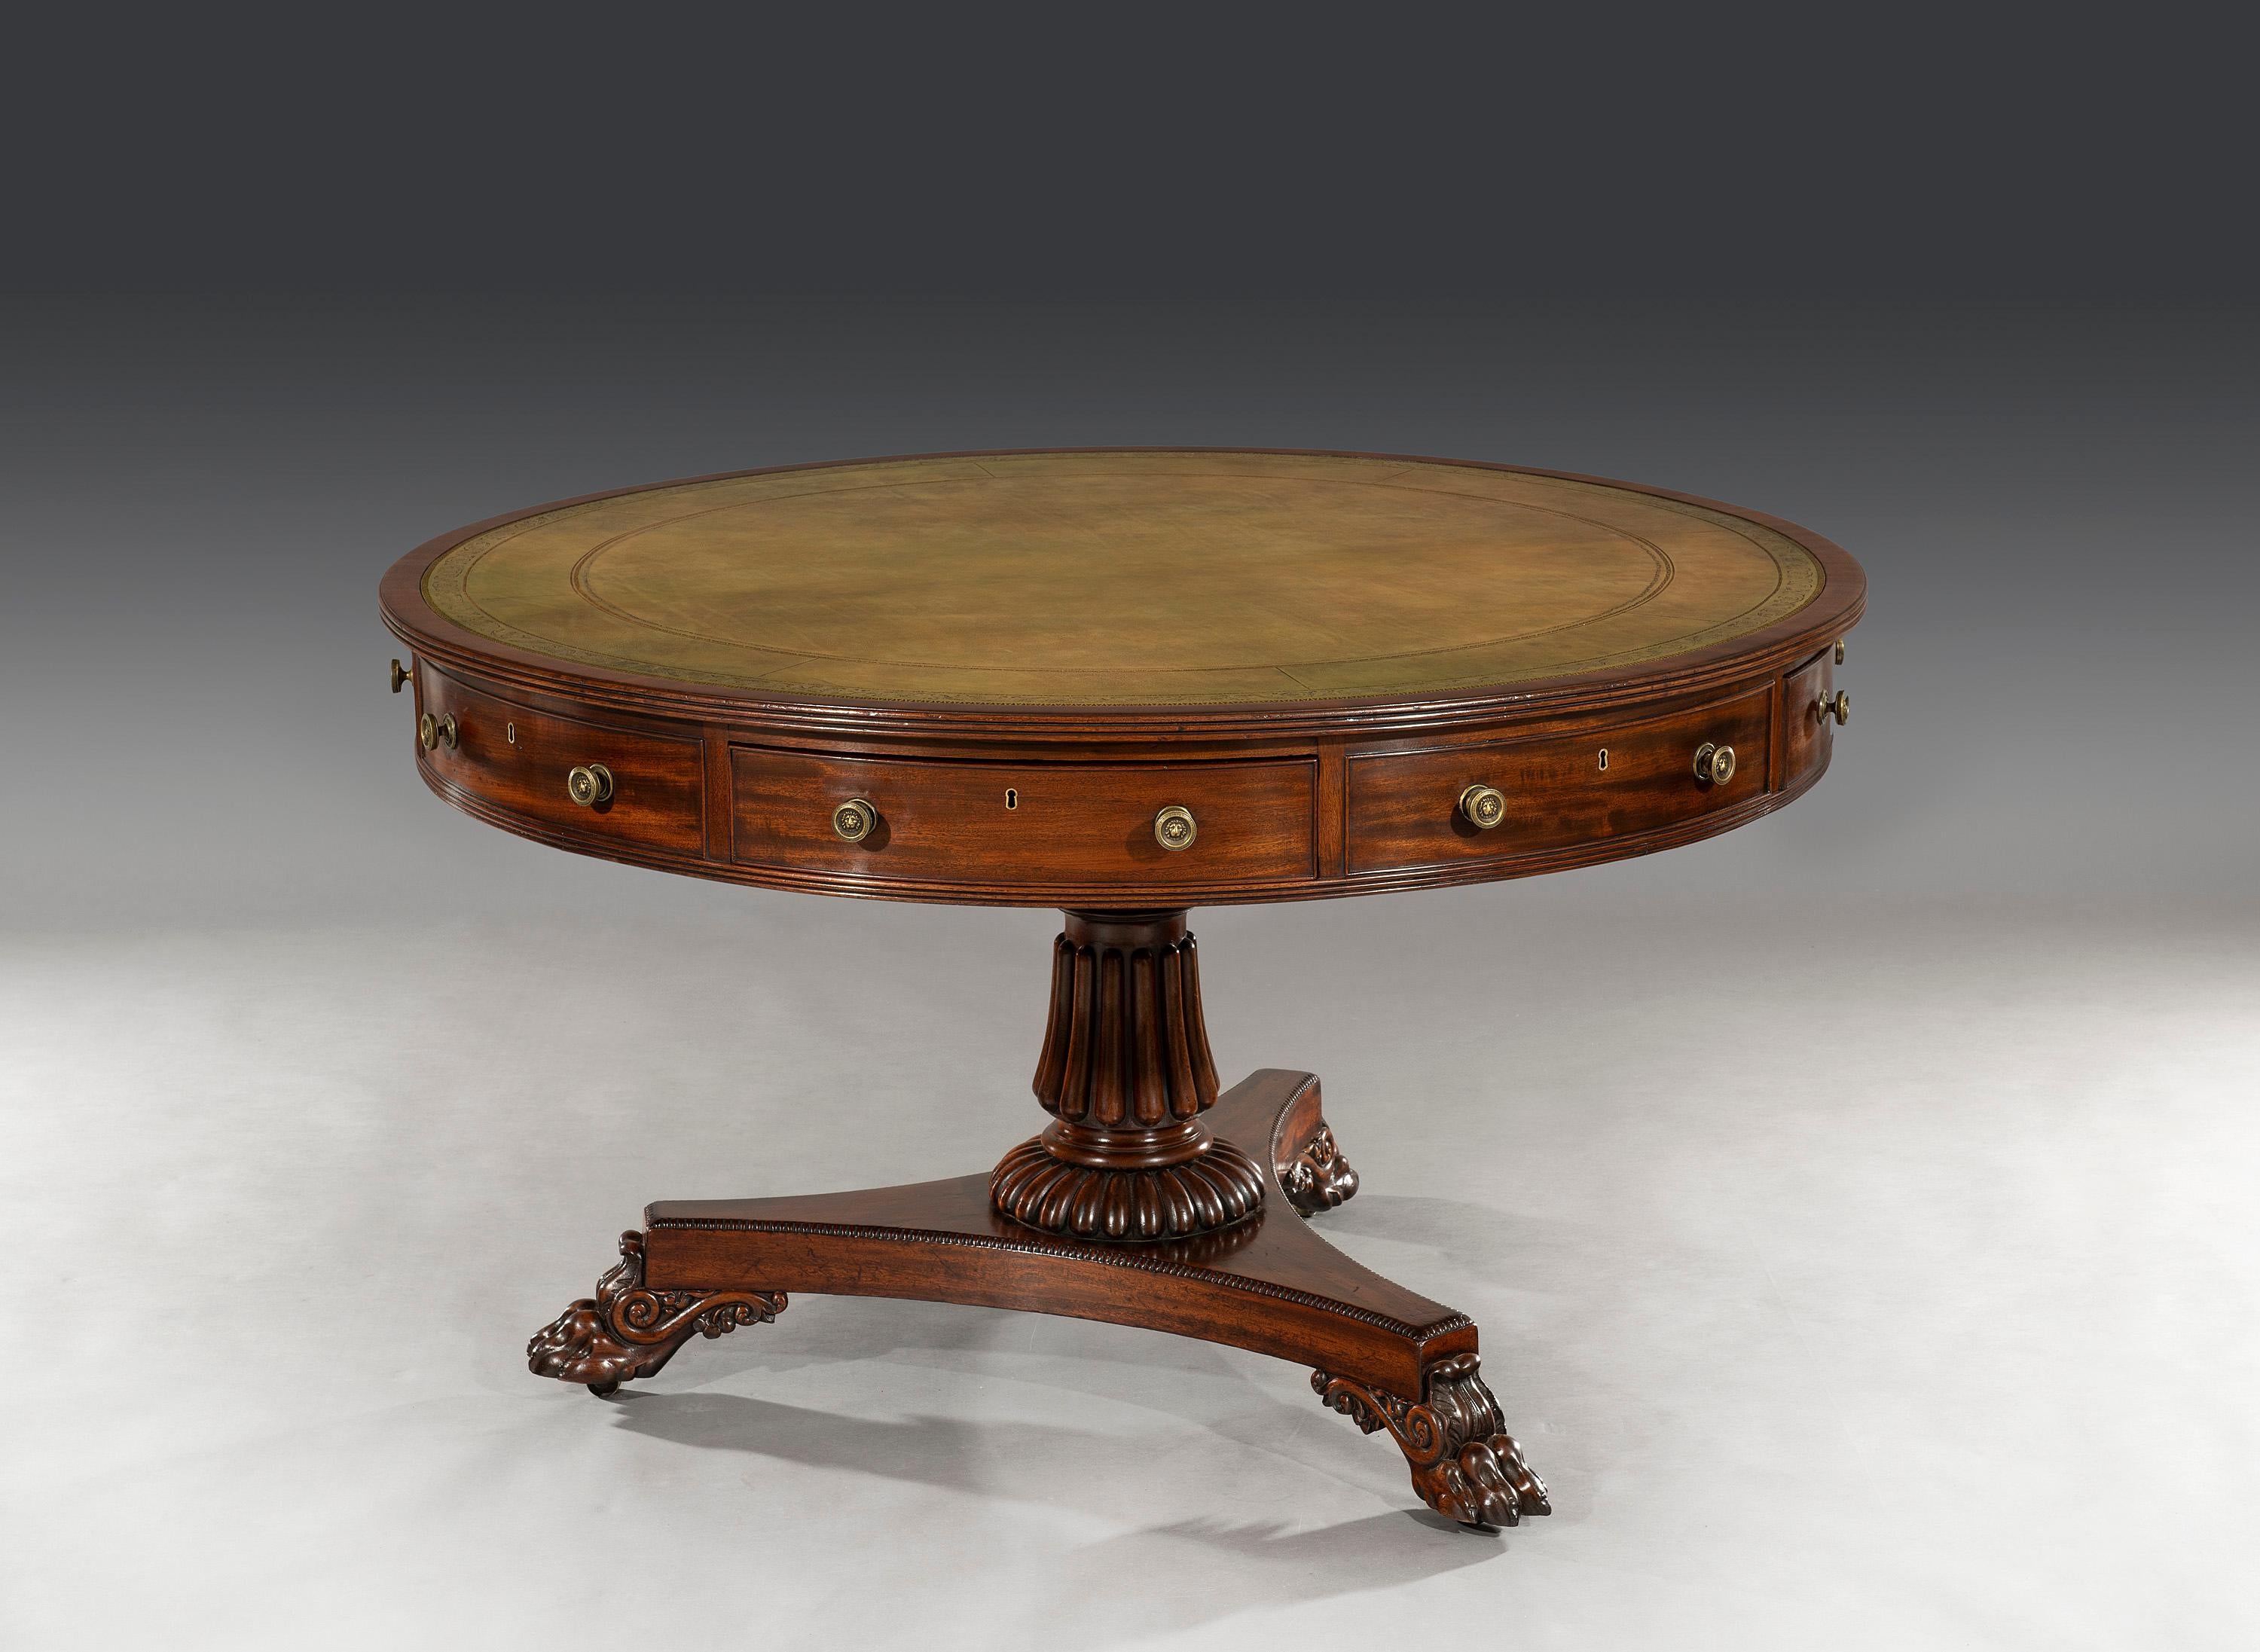 Early 19th Century Late George III Regency Period Revolving Mahogany Drum Table by Gillows For Sale